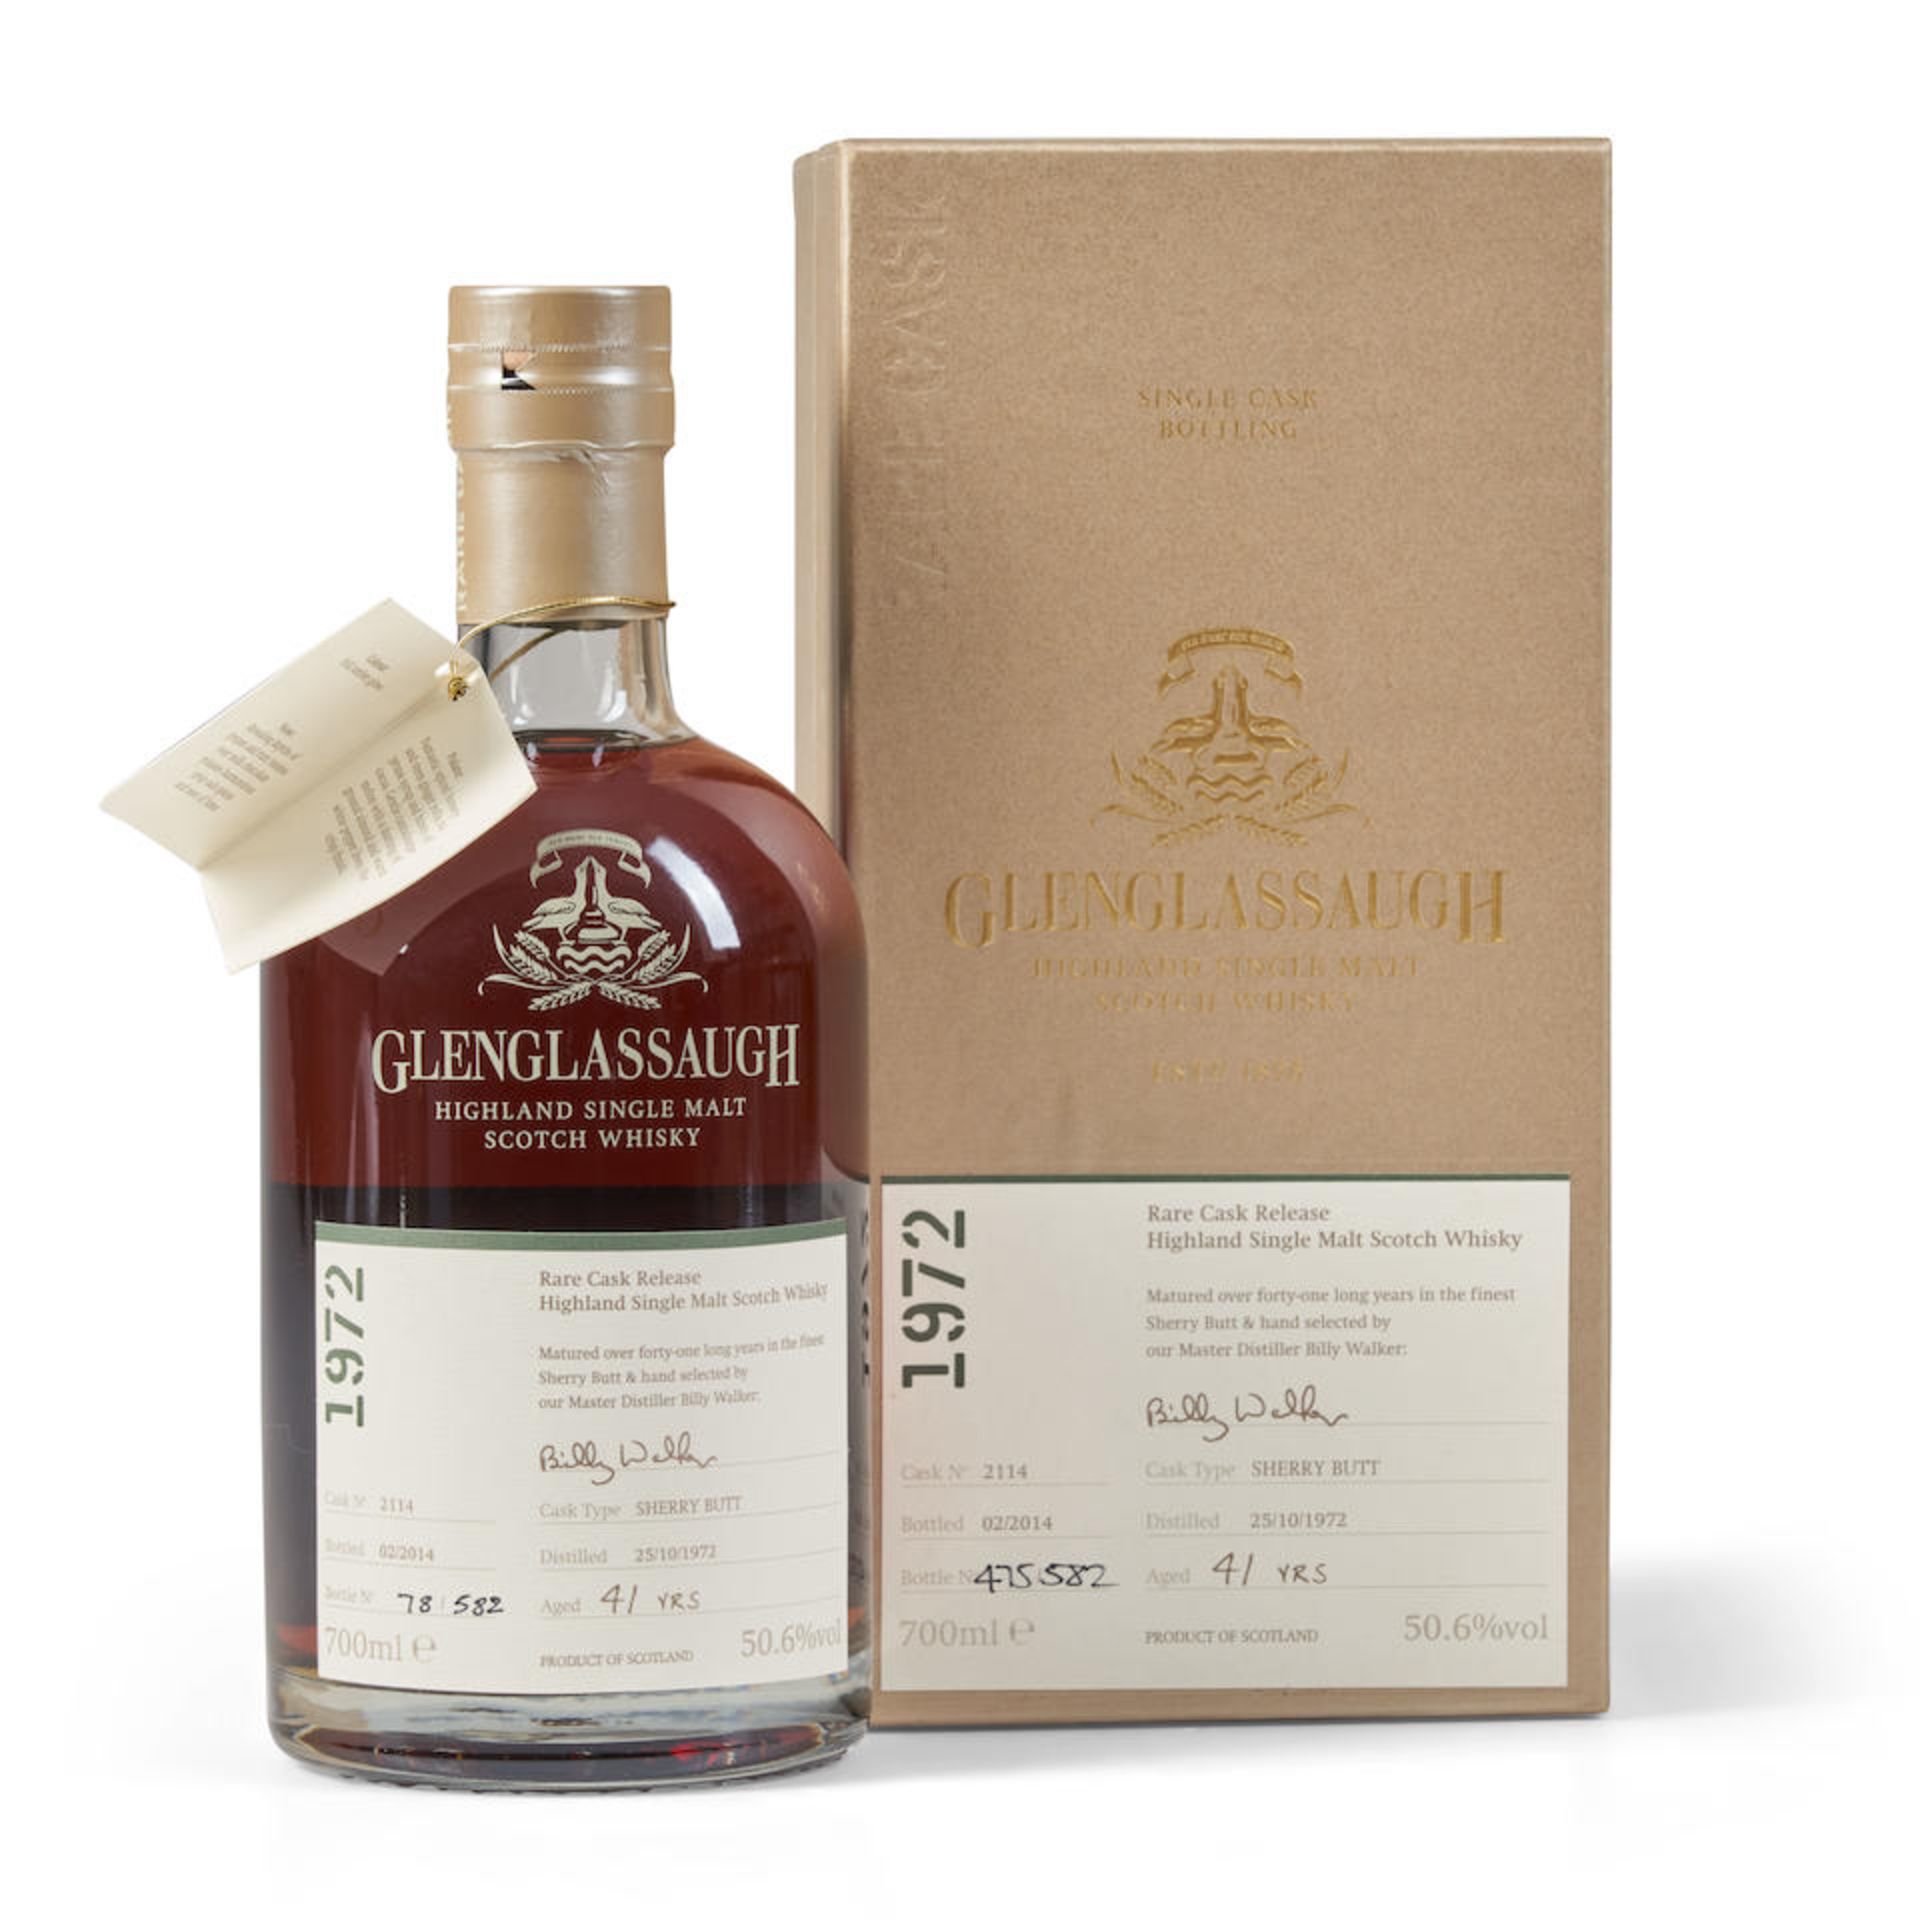 Glenglassaugh Rare Cask Release 41 Years Old 1972 (1 70cl bottle)